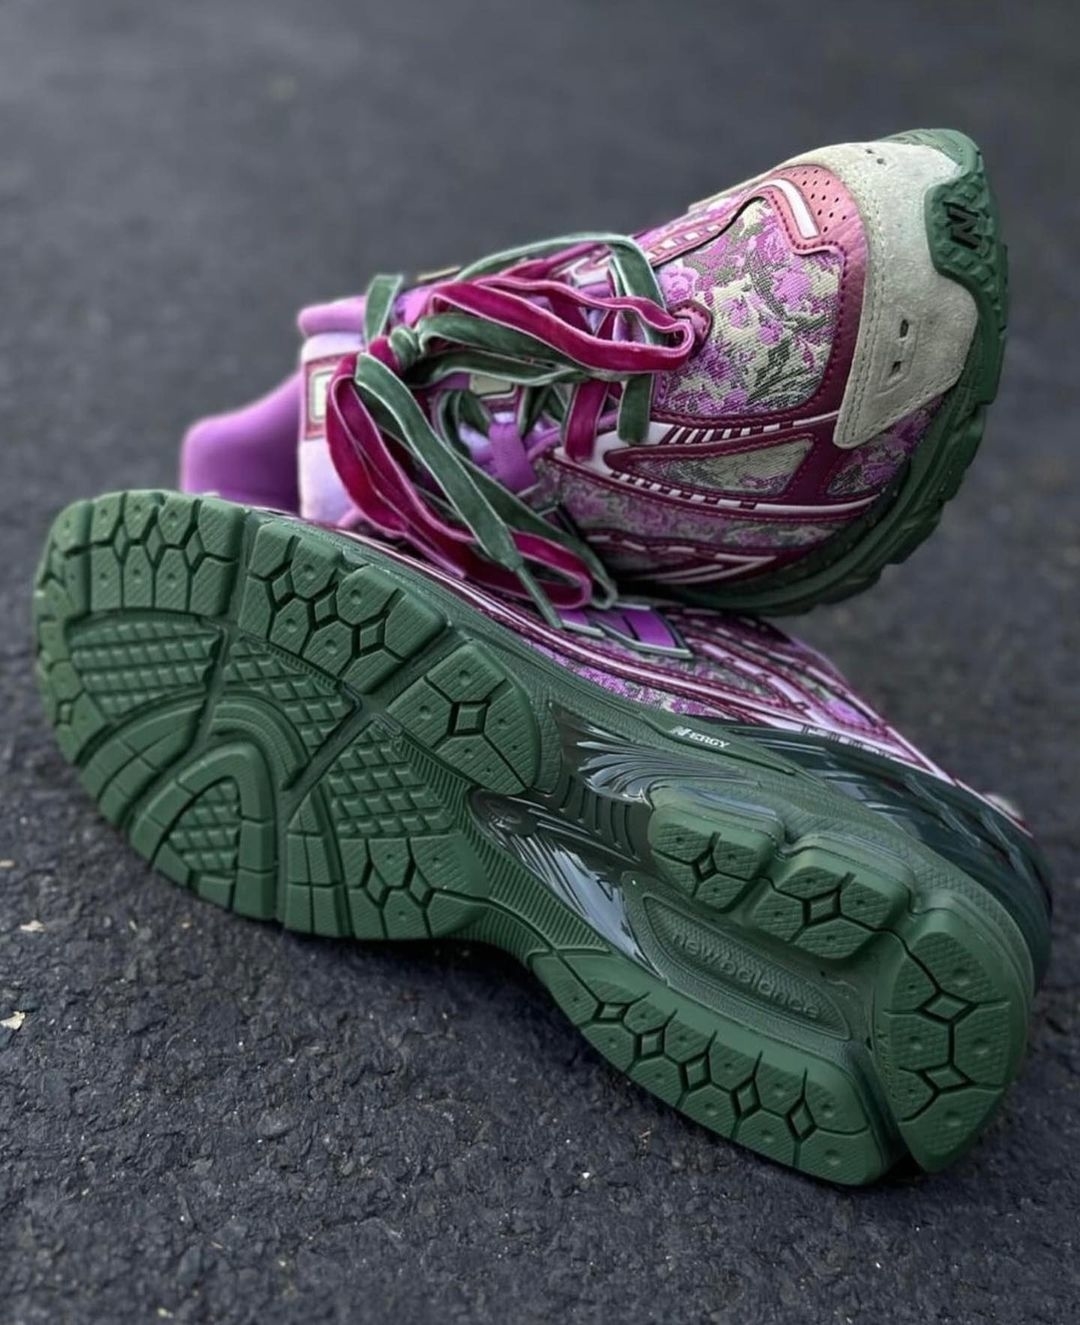 A pair of intricately patterned purple and green sneakers with visible soles, resting on pavement